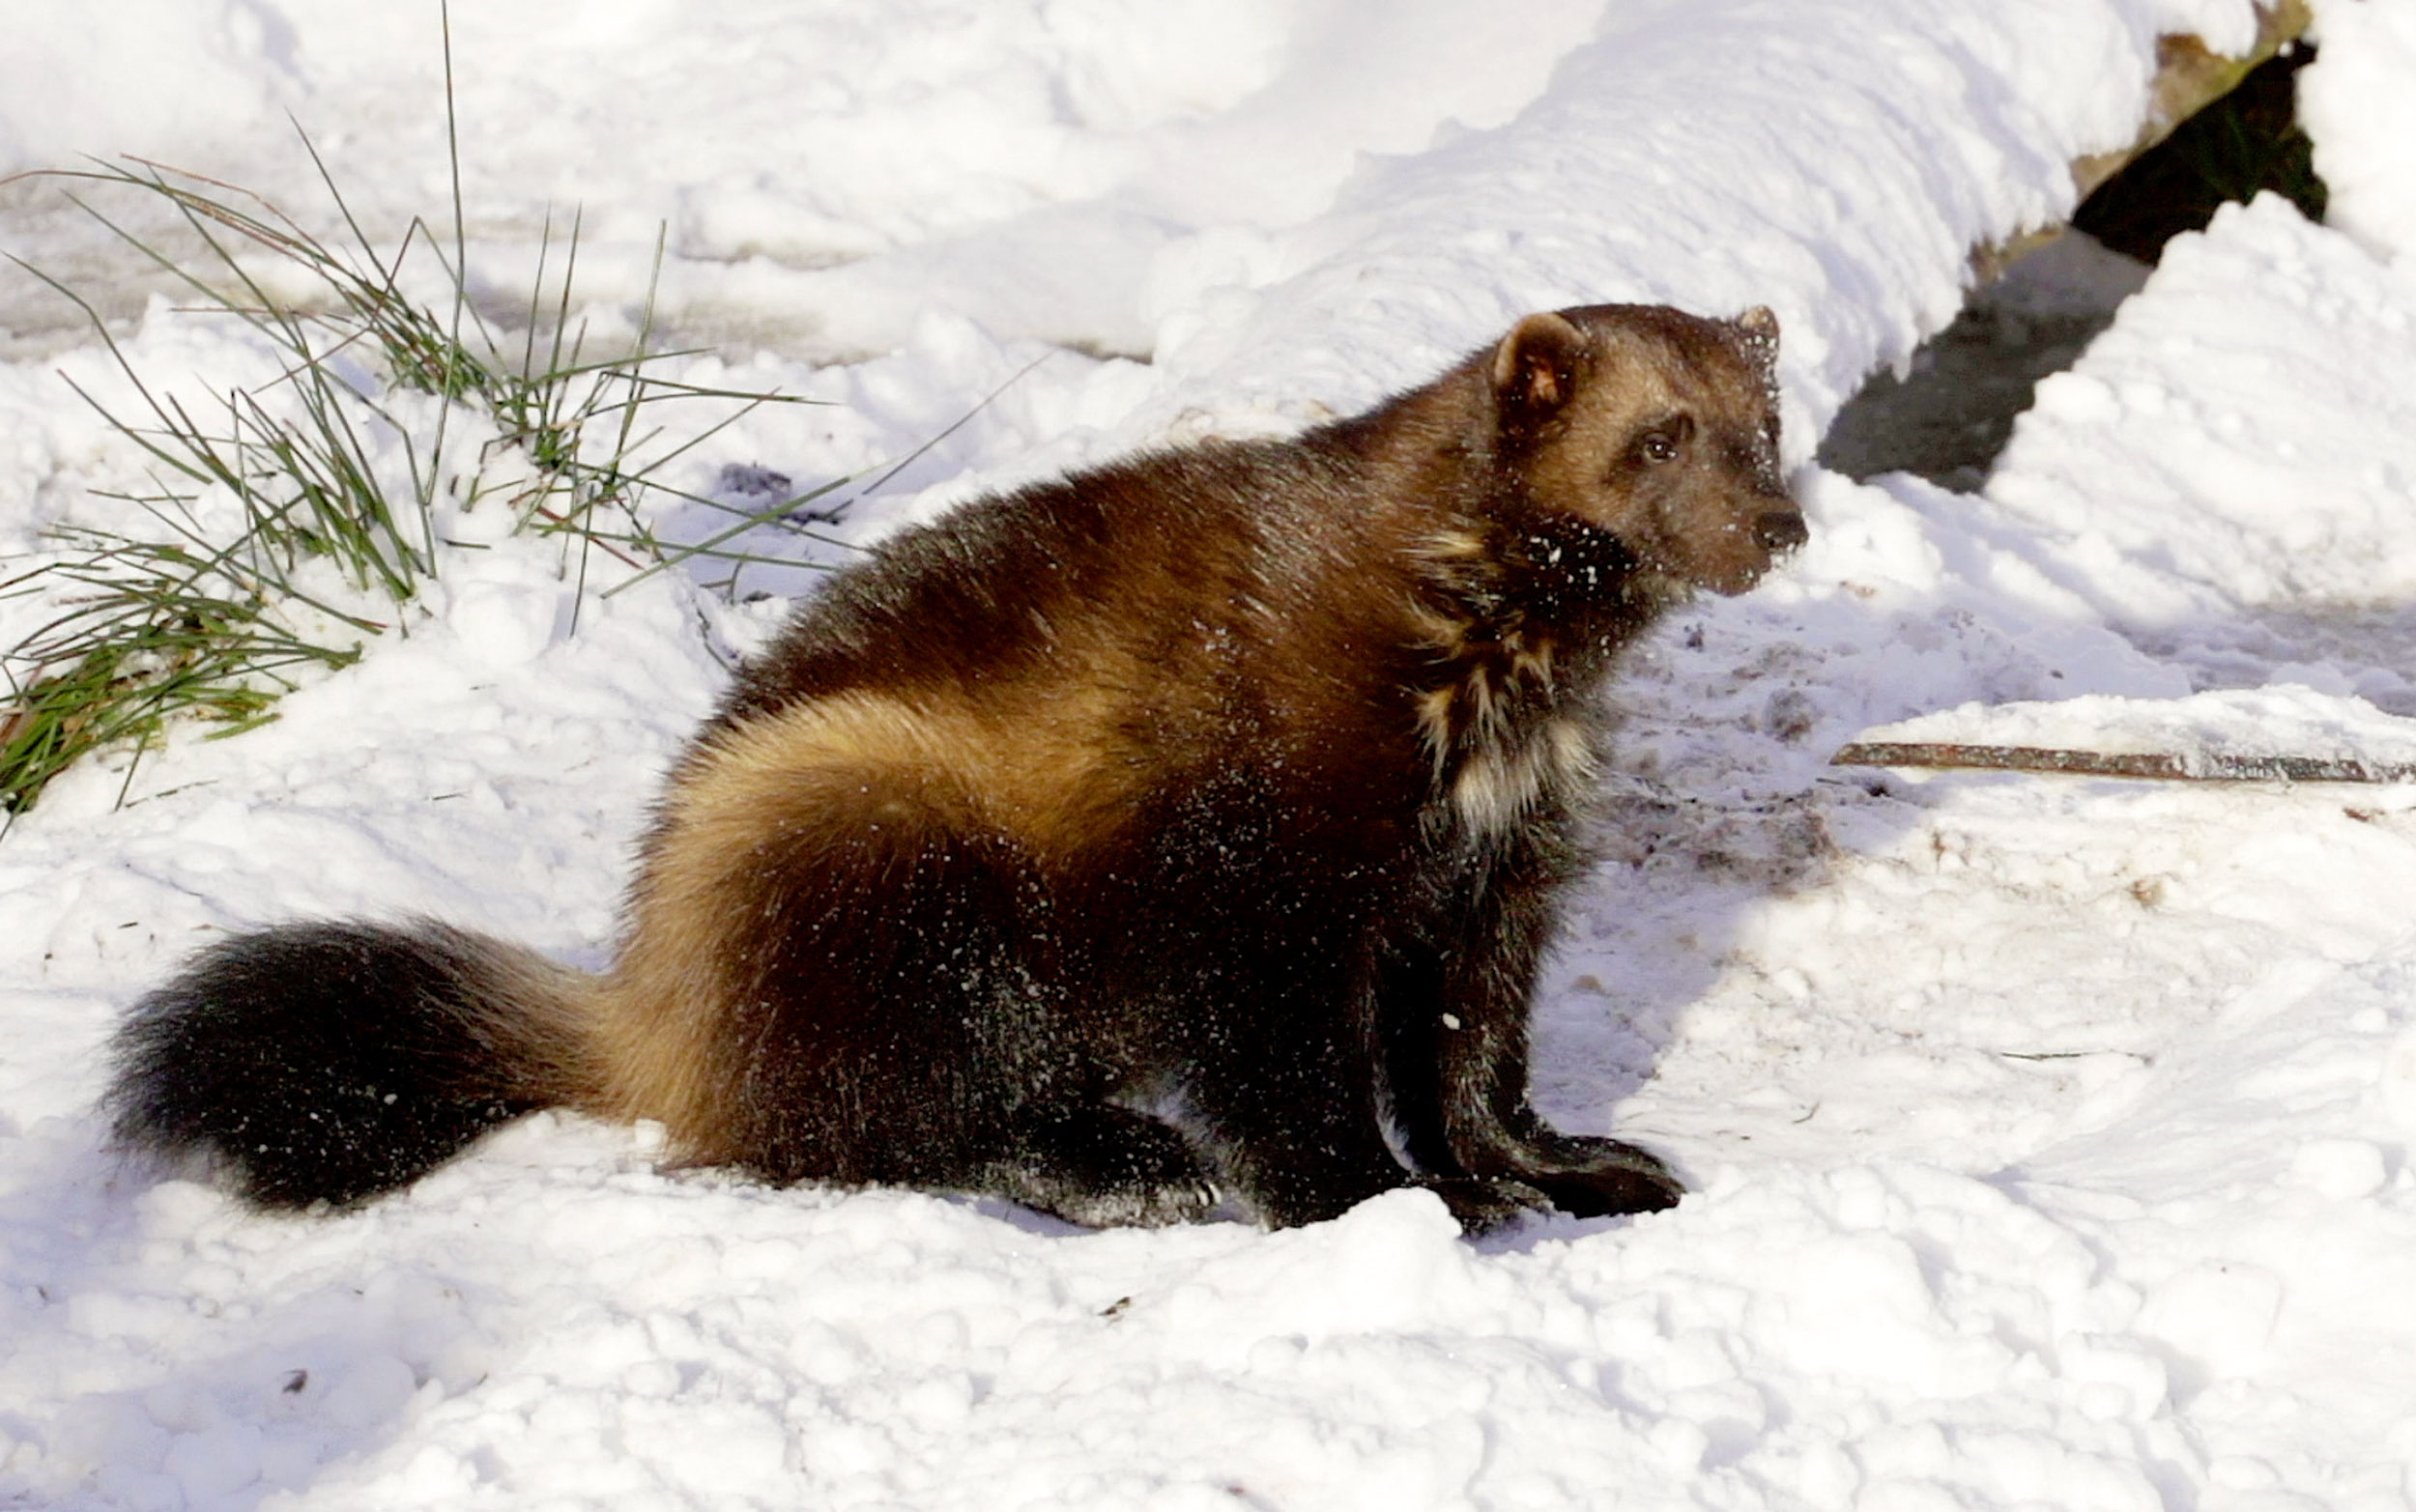 A Wolverine in the snow at the Highland Wildlife Park, Kingussie.
Wolverine pair Tina and Xale have been enjoying the thick layer of snow which has fallen at RZSS Highland Wildlife Park. 

The duo were introduced in 2015 and soon became parents to the first wolverine kits to be born and reared in Scotland and only the third litter in the UK.